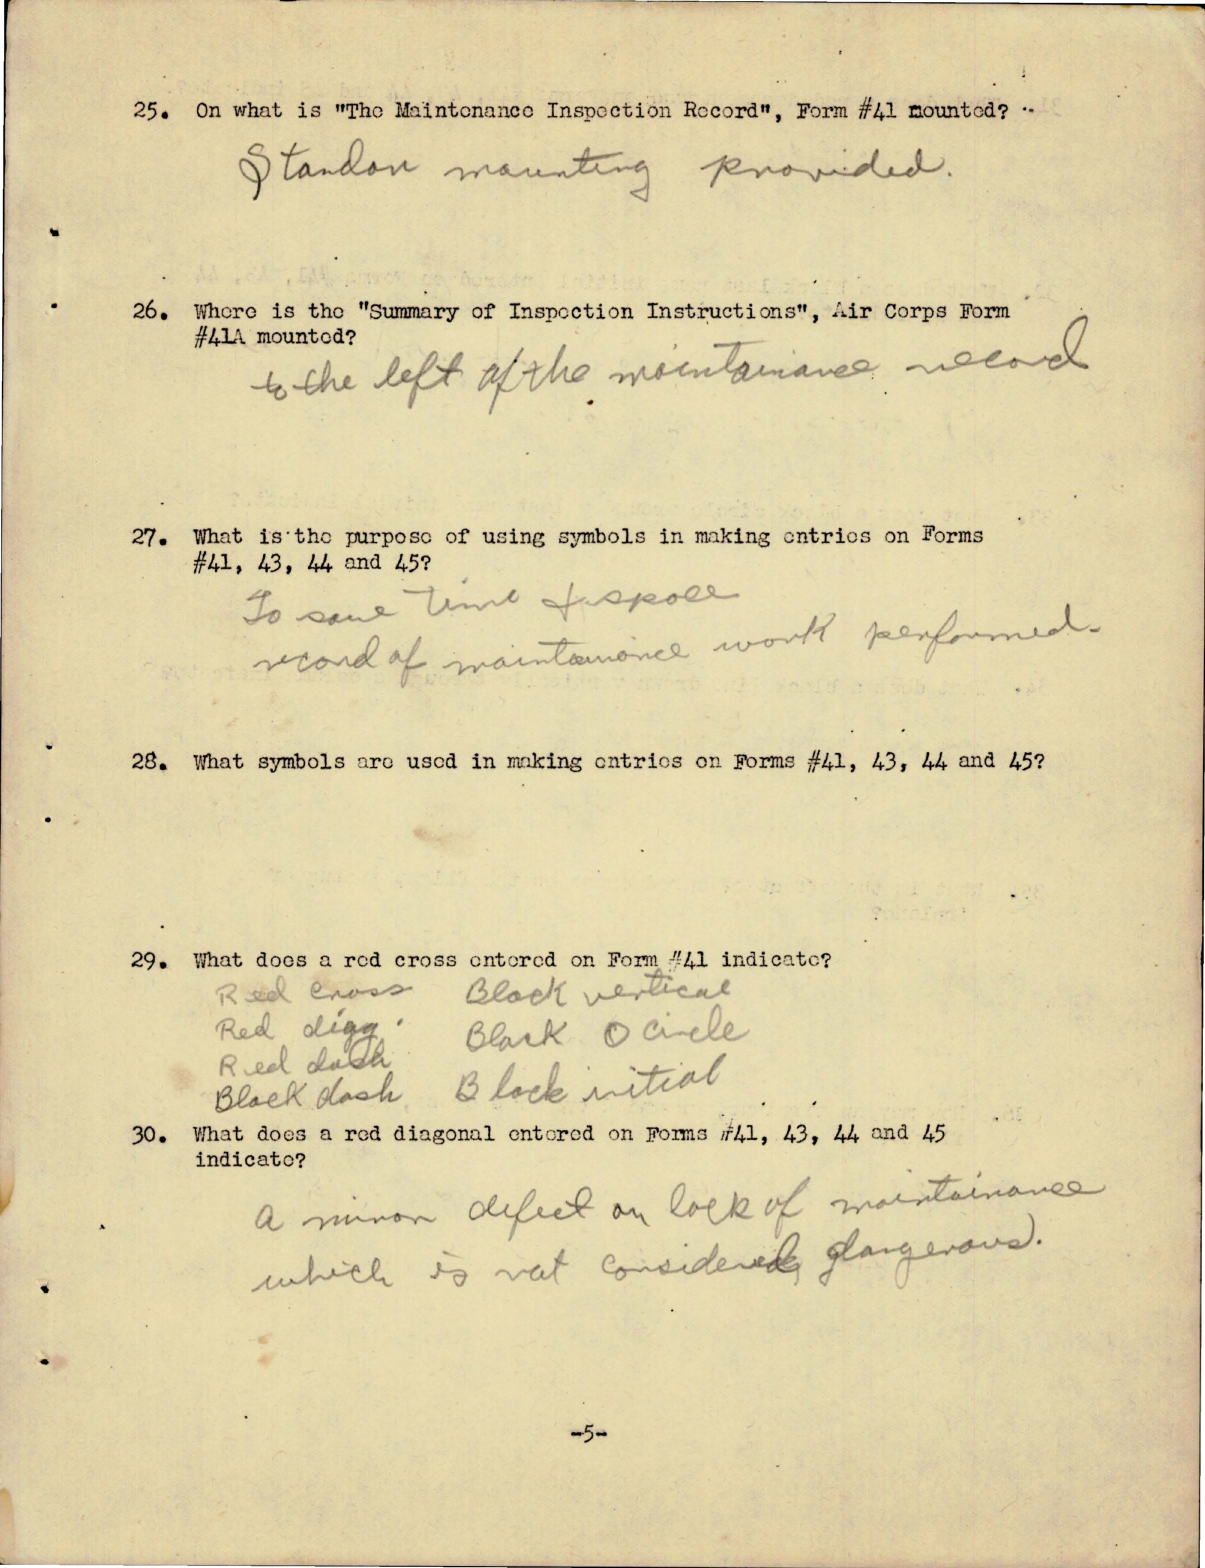 Sample page 7 from AirCorps Library document: Questionnaire for Air Corps Fundamentals